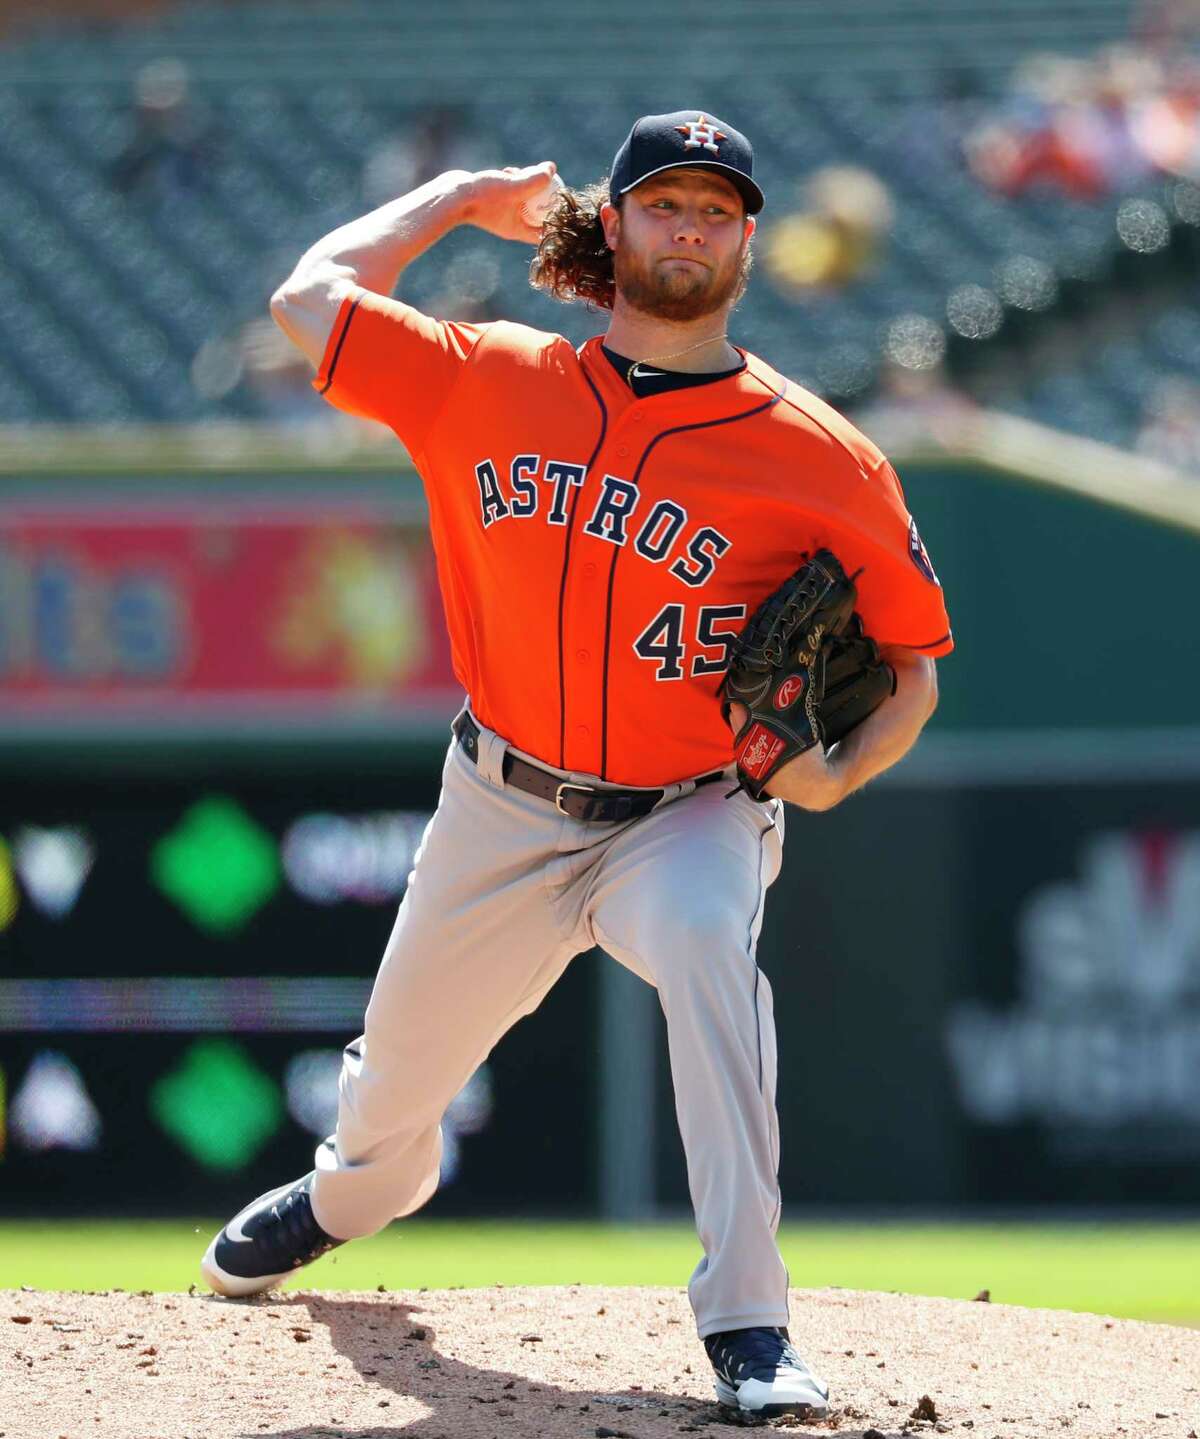 Houston Astros pitcher Gerrit Cole throws against the Detroit Tigers in the first inning of a baseball game in Detroit, Wednesday, Sept. 12, 2018. (AP Photo/Paul Sancya)